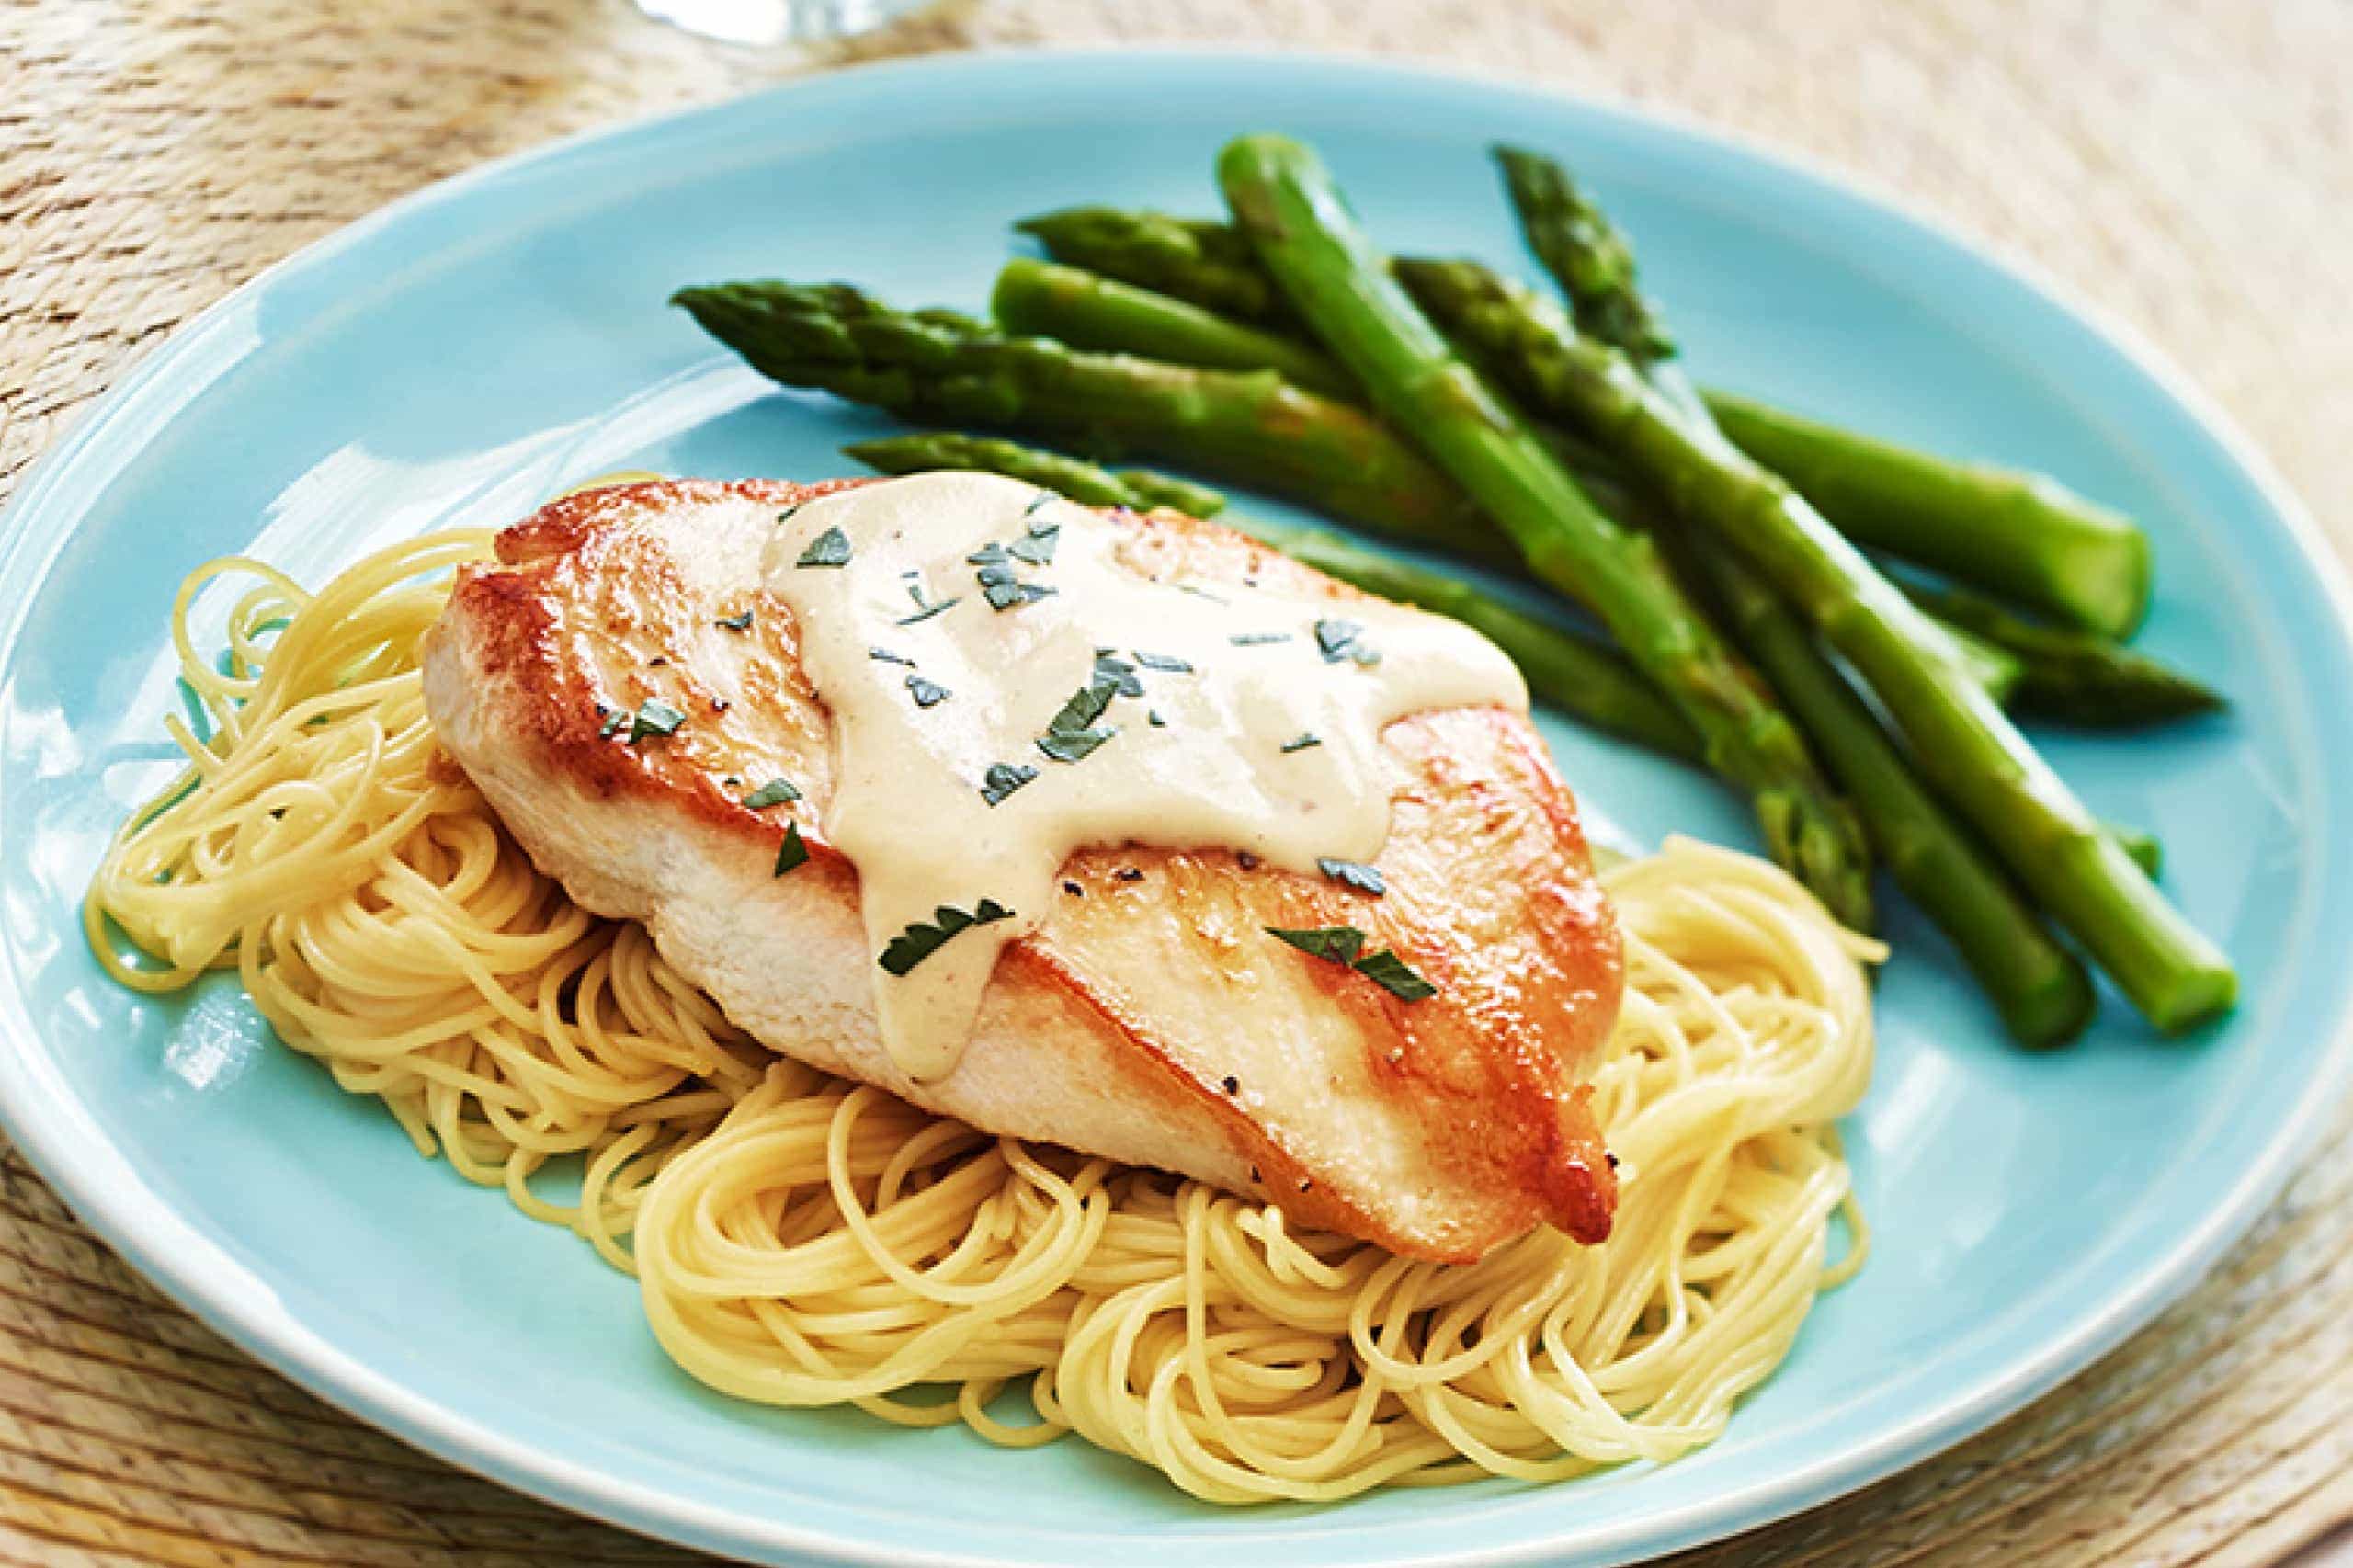 Dressed Chicken Breasts with Angel Hair Pasta Recipe